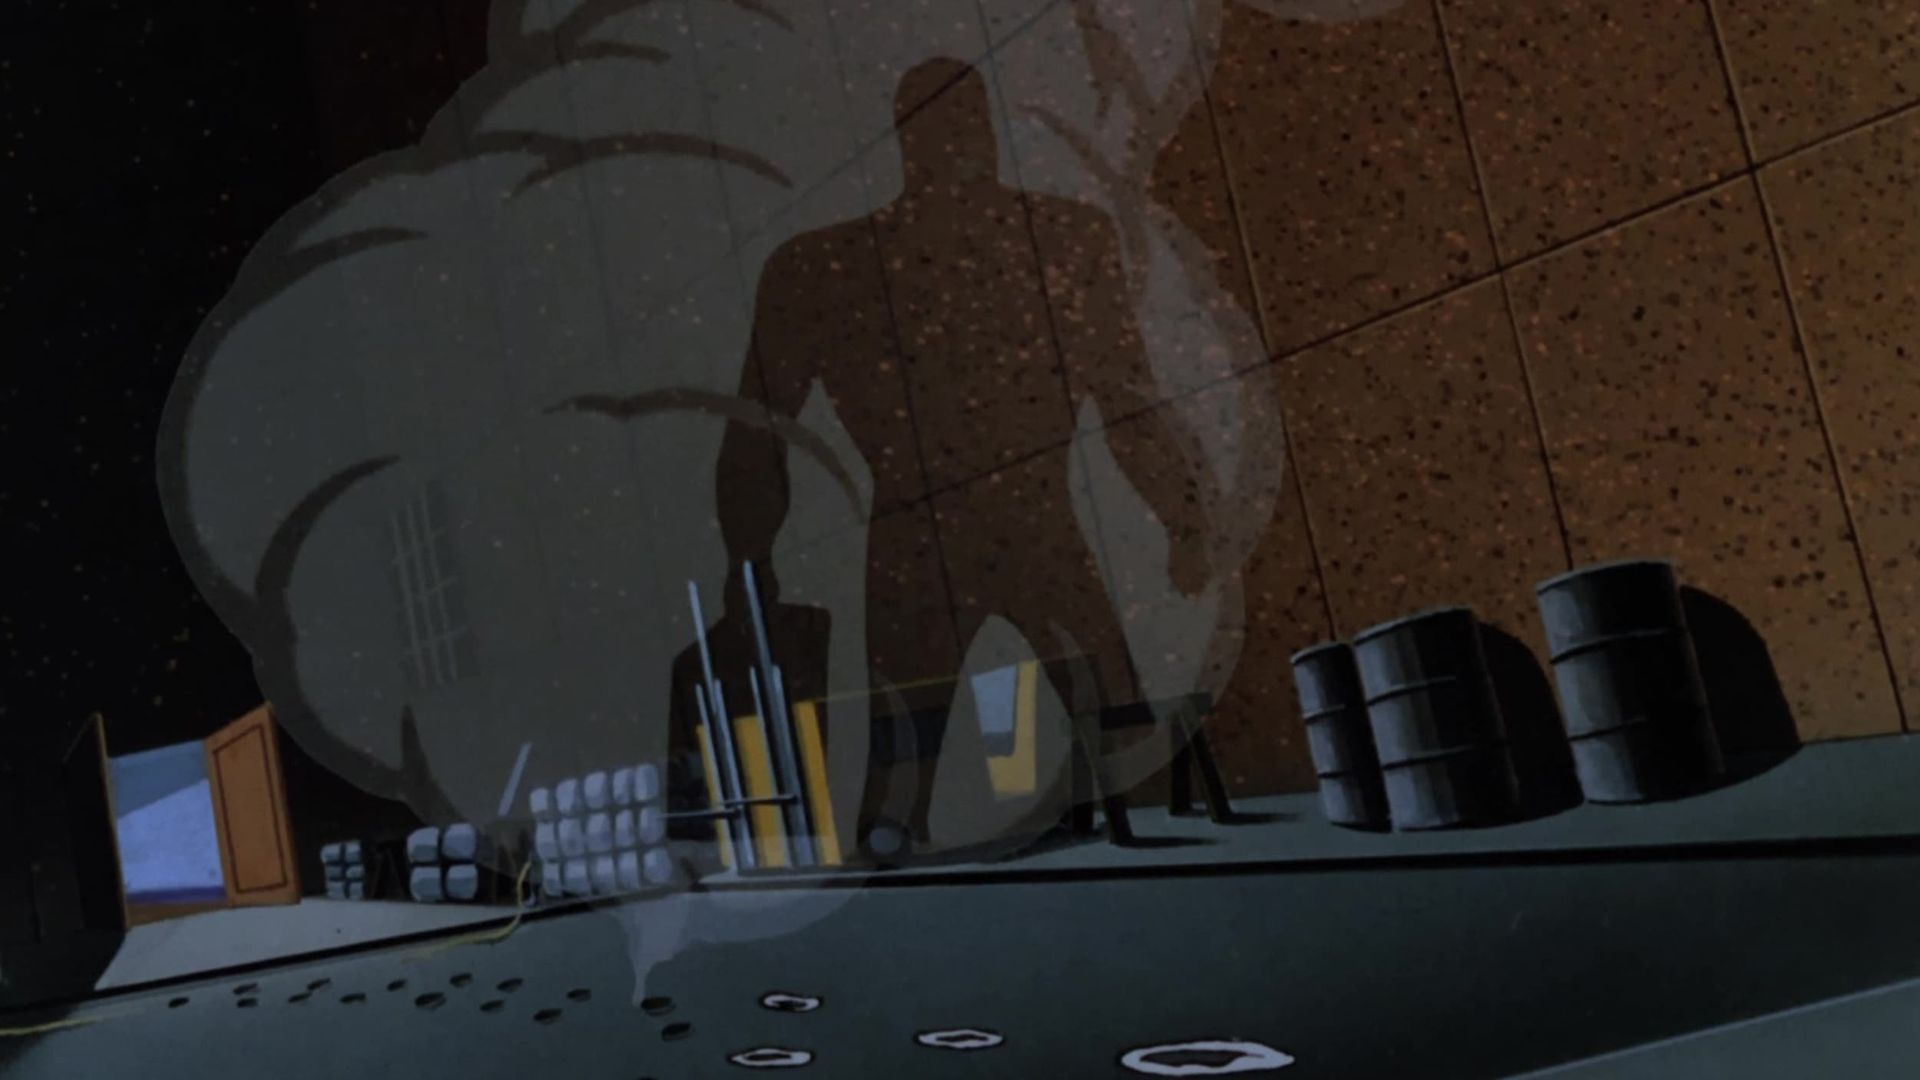 Batman: The Animated Series background